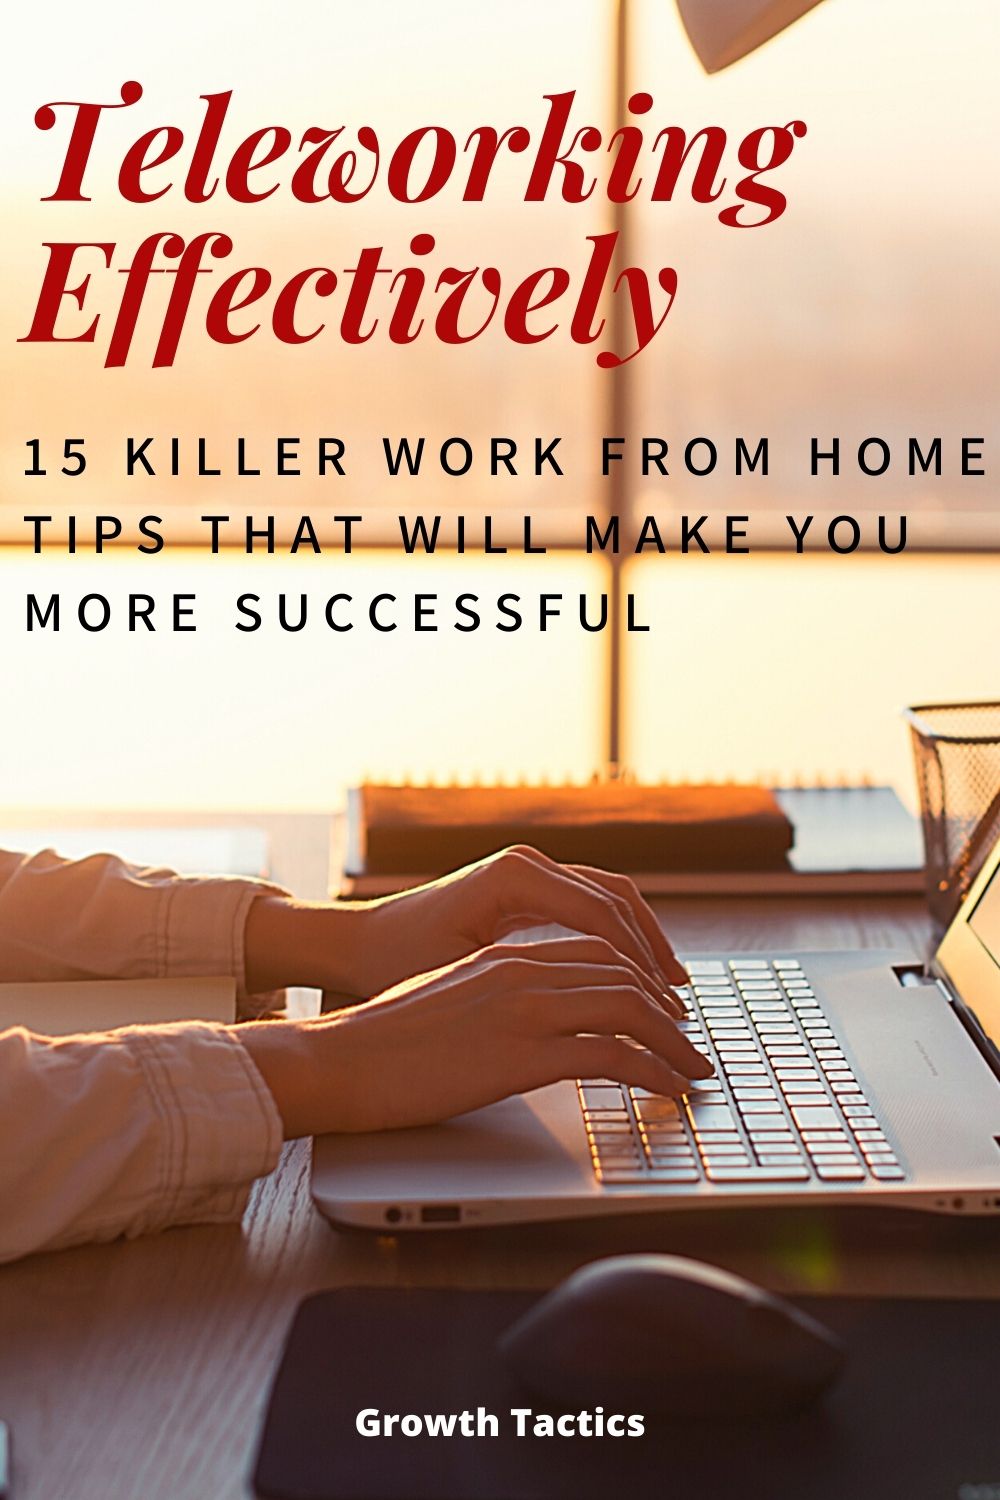 15 Killer Work From Home Tips That Will Make You More Successful